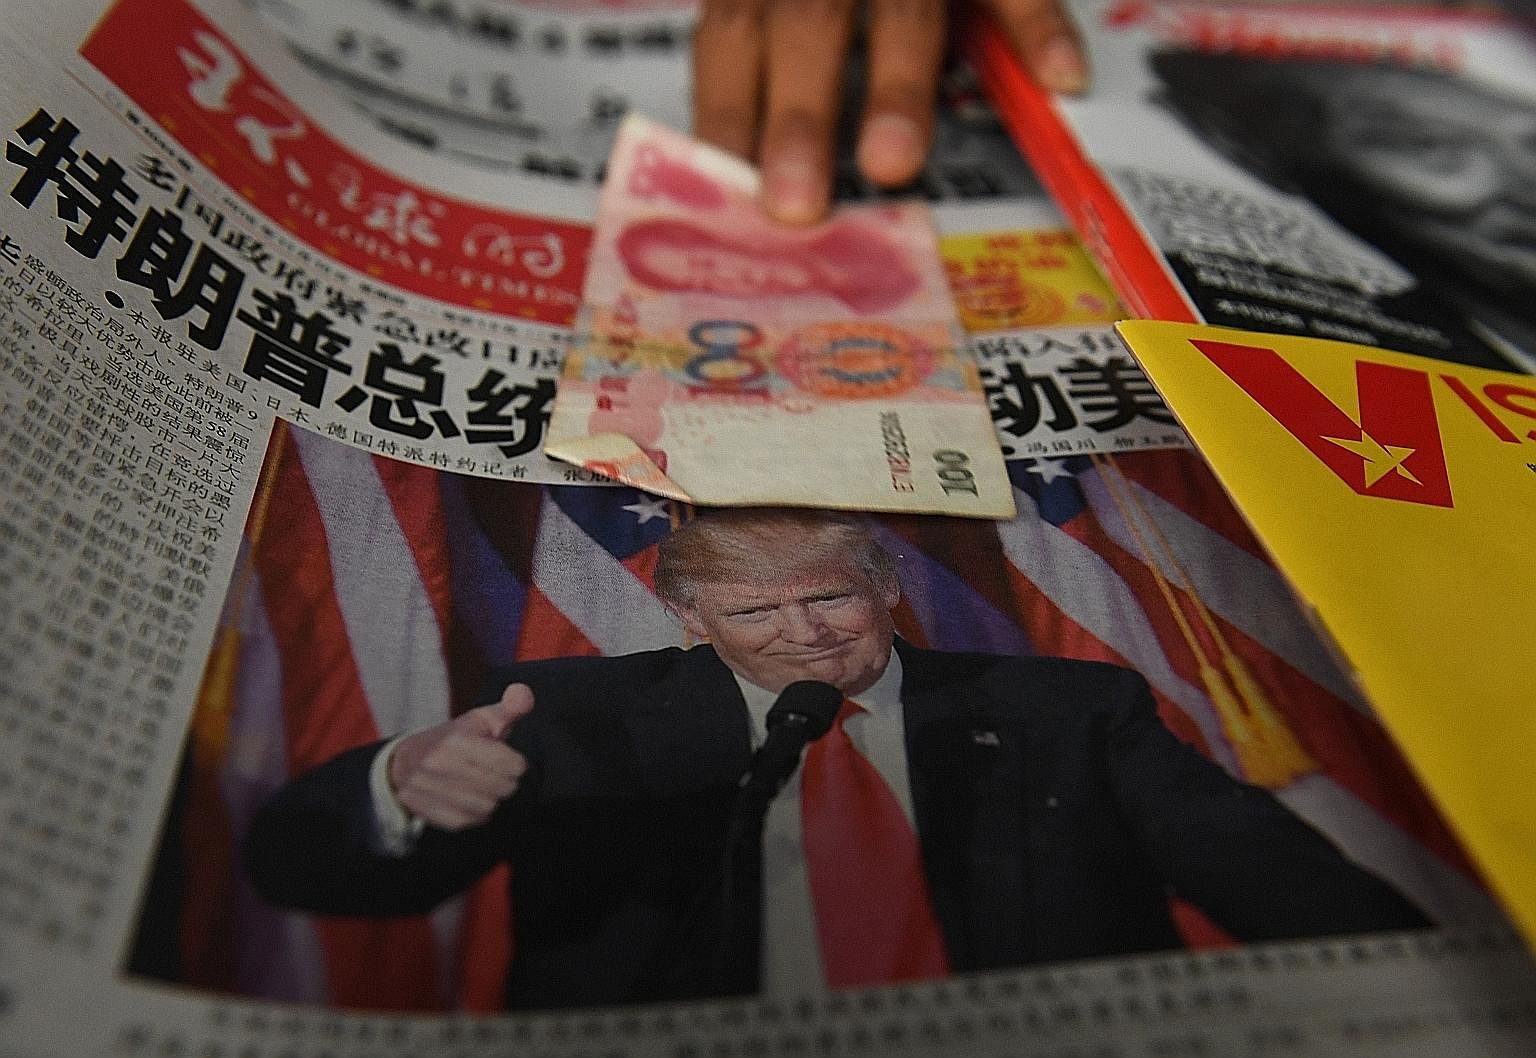 A newspaper with a photo of Mr Trump at a Beijing news-stand last Thursday. The President-elect has made clear his views on China as the source of many US problems. His administration may take a more principled and hard-headed approach to engagement 